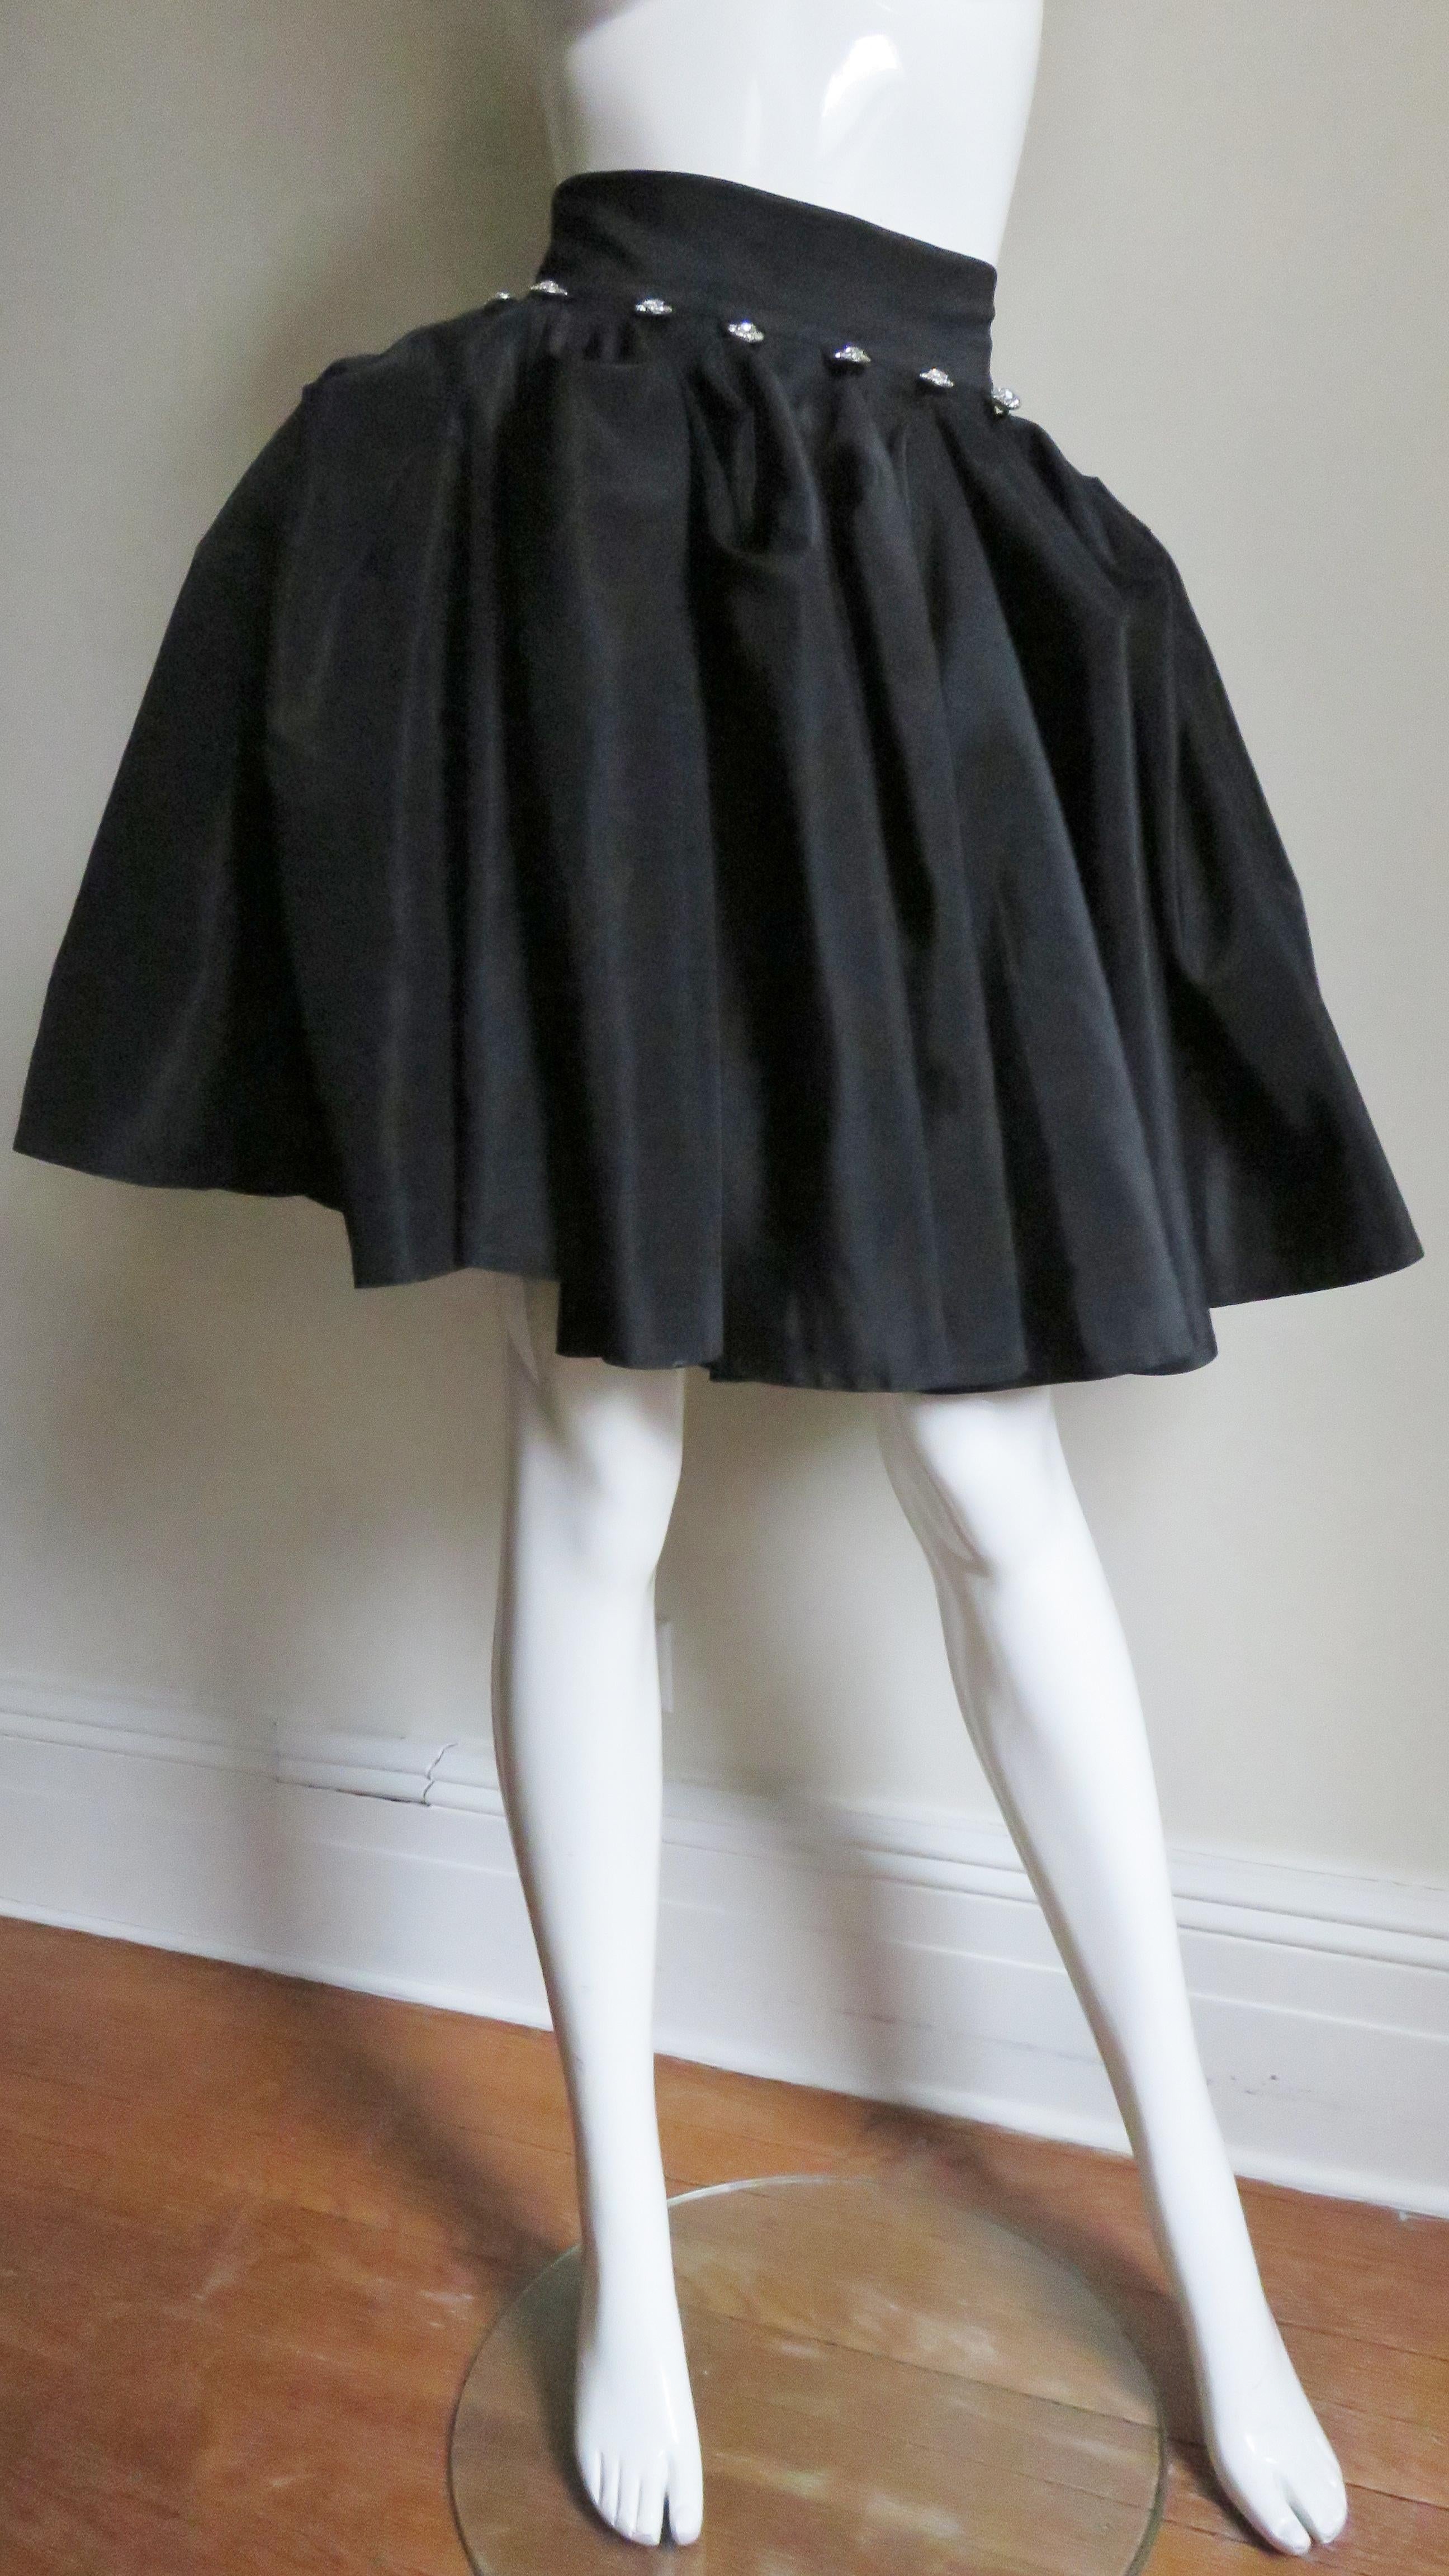 An ingenious design in a long taffeta skirt that converts into a knee length skirt or half up and half down. The full circle skirt has 15 faceted rhinestone buttons sewn at the half way point around it's circumference which can be buttoned onto